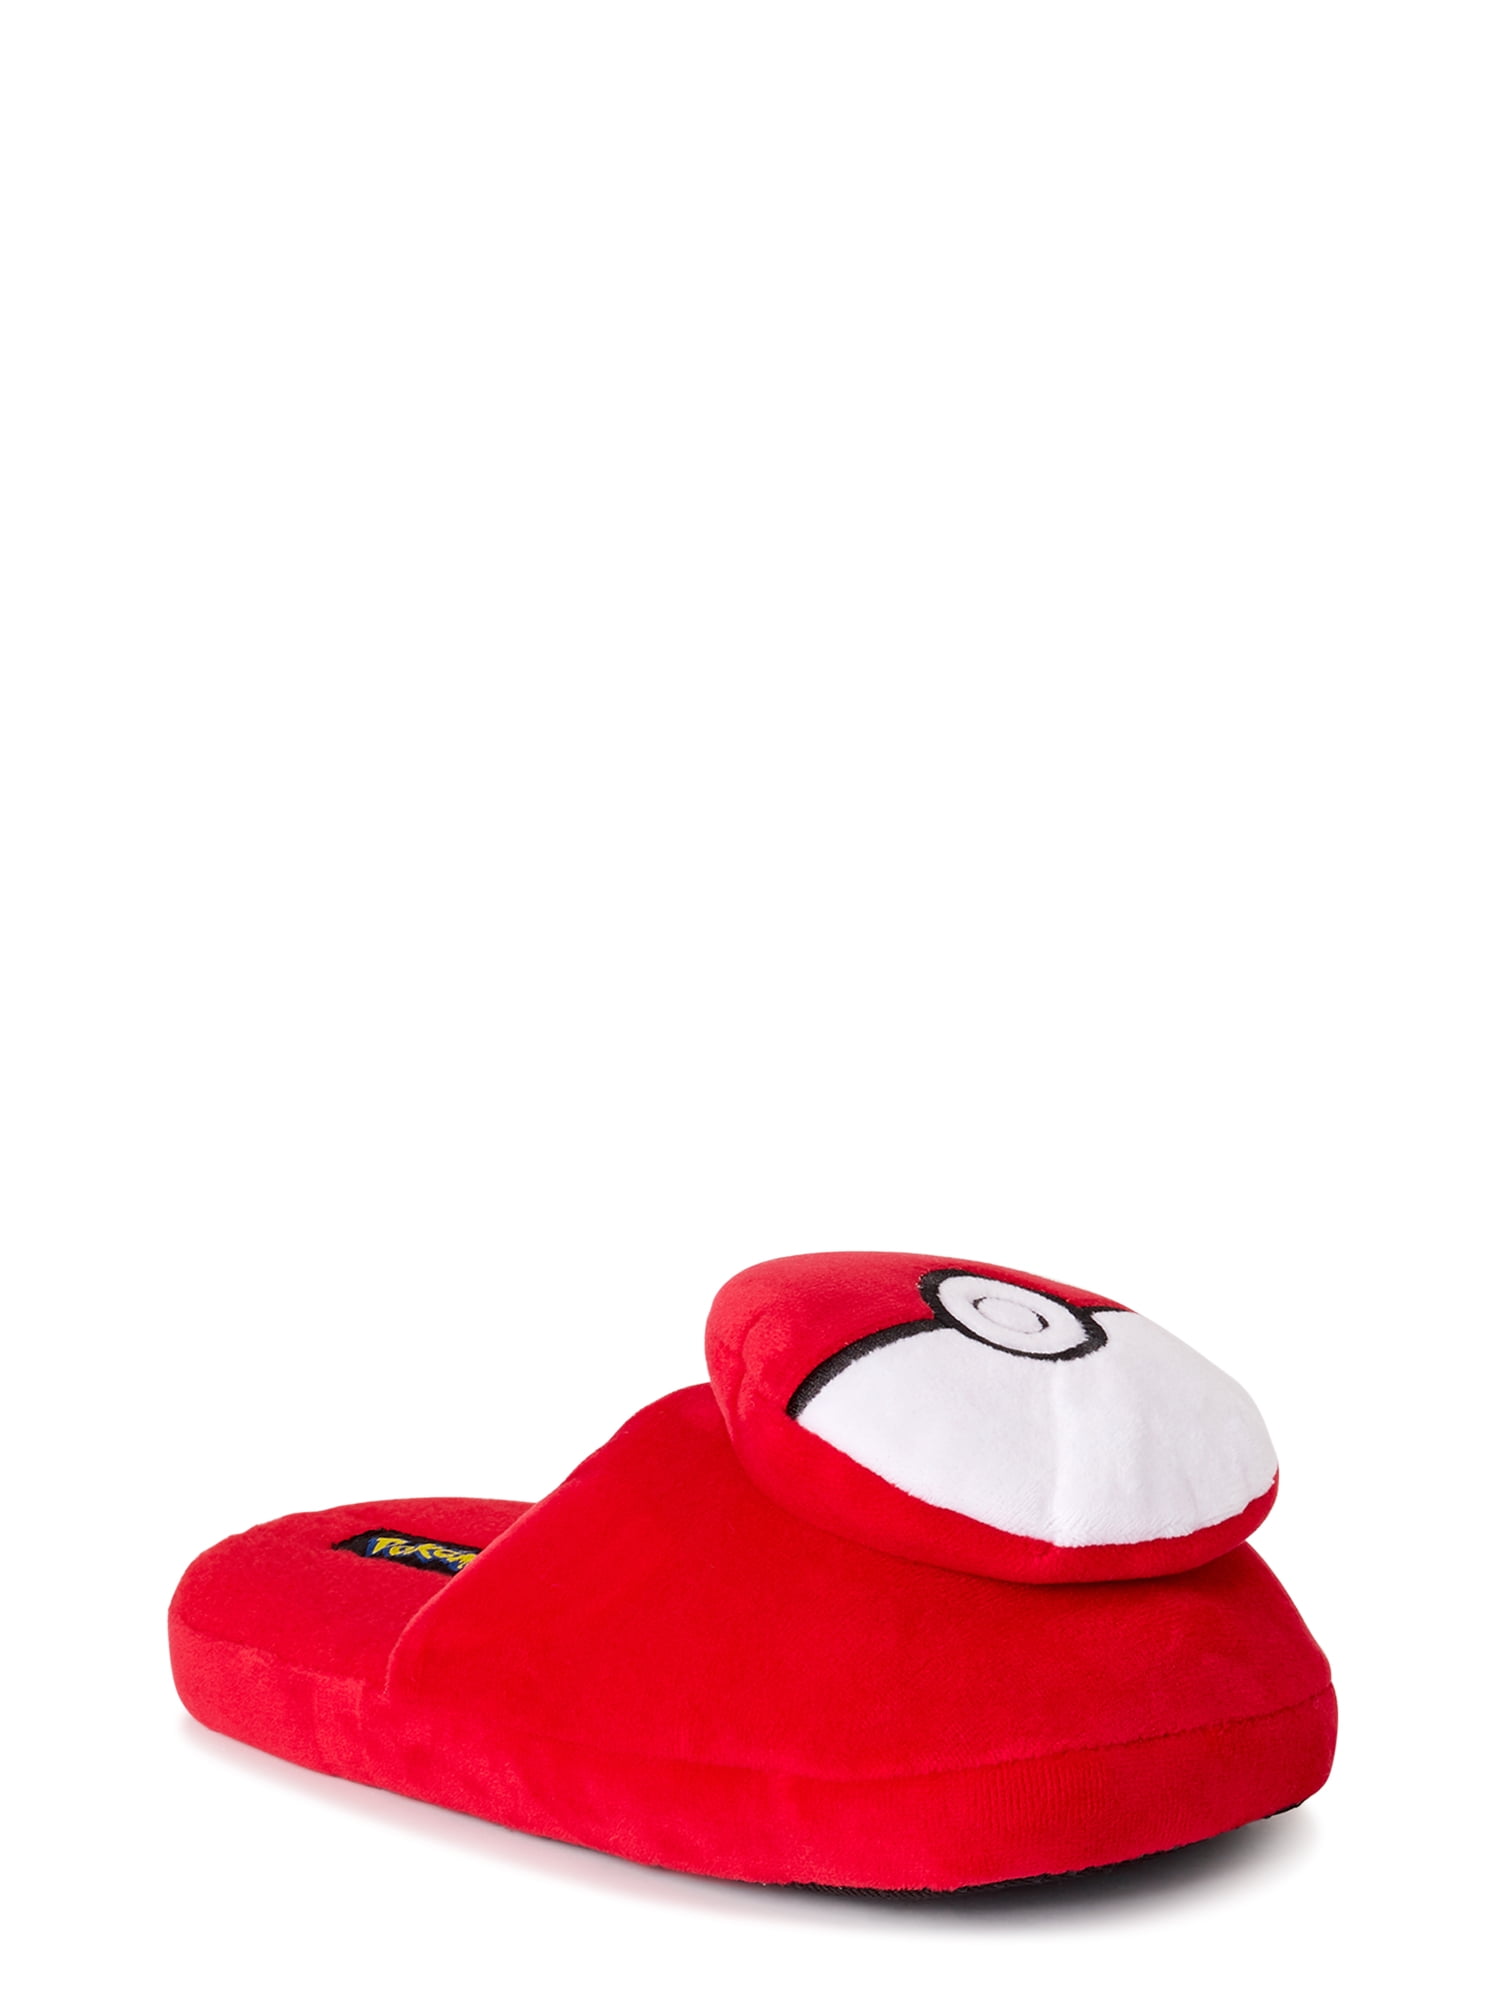 boys red slippers